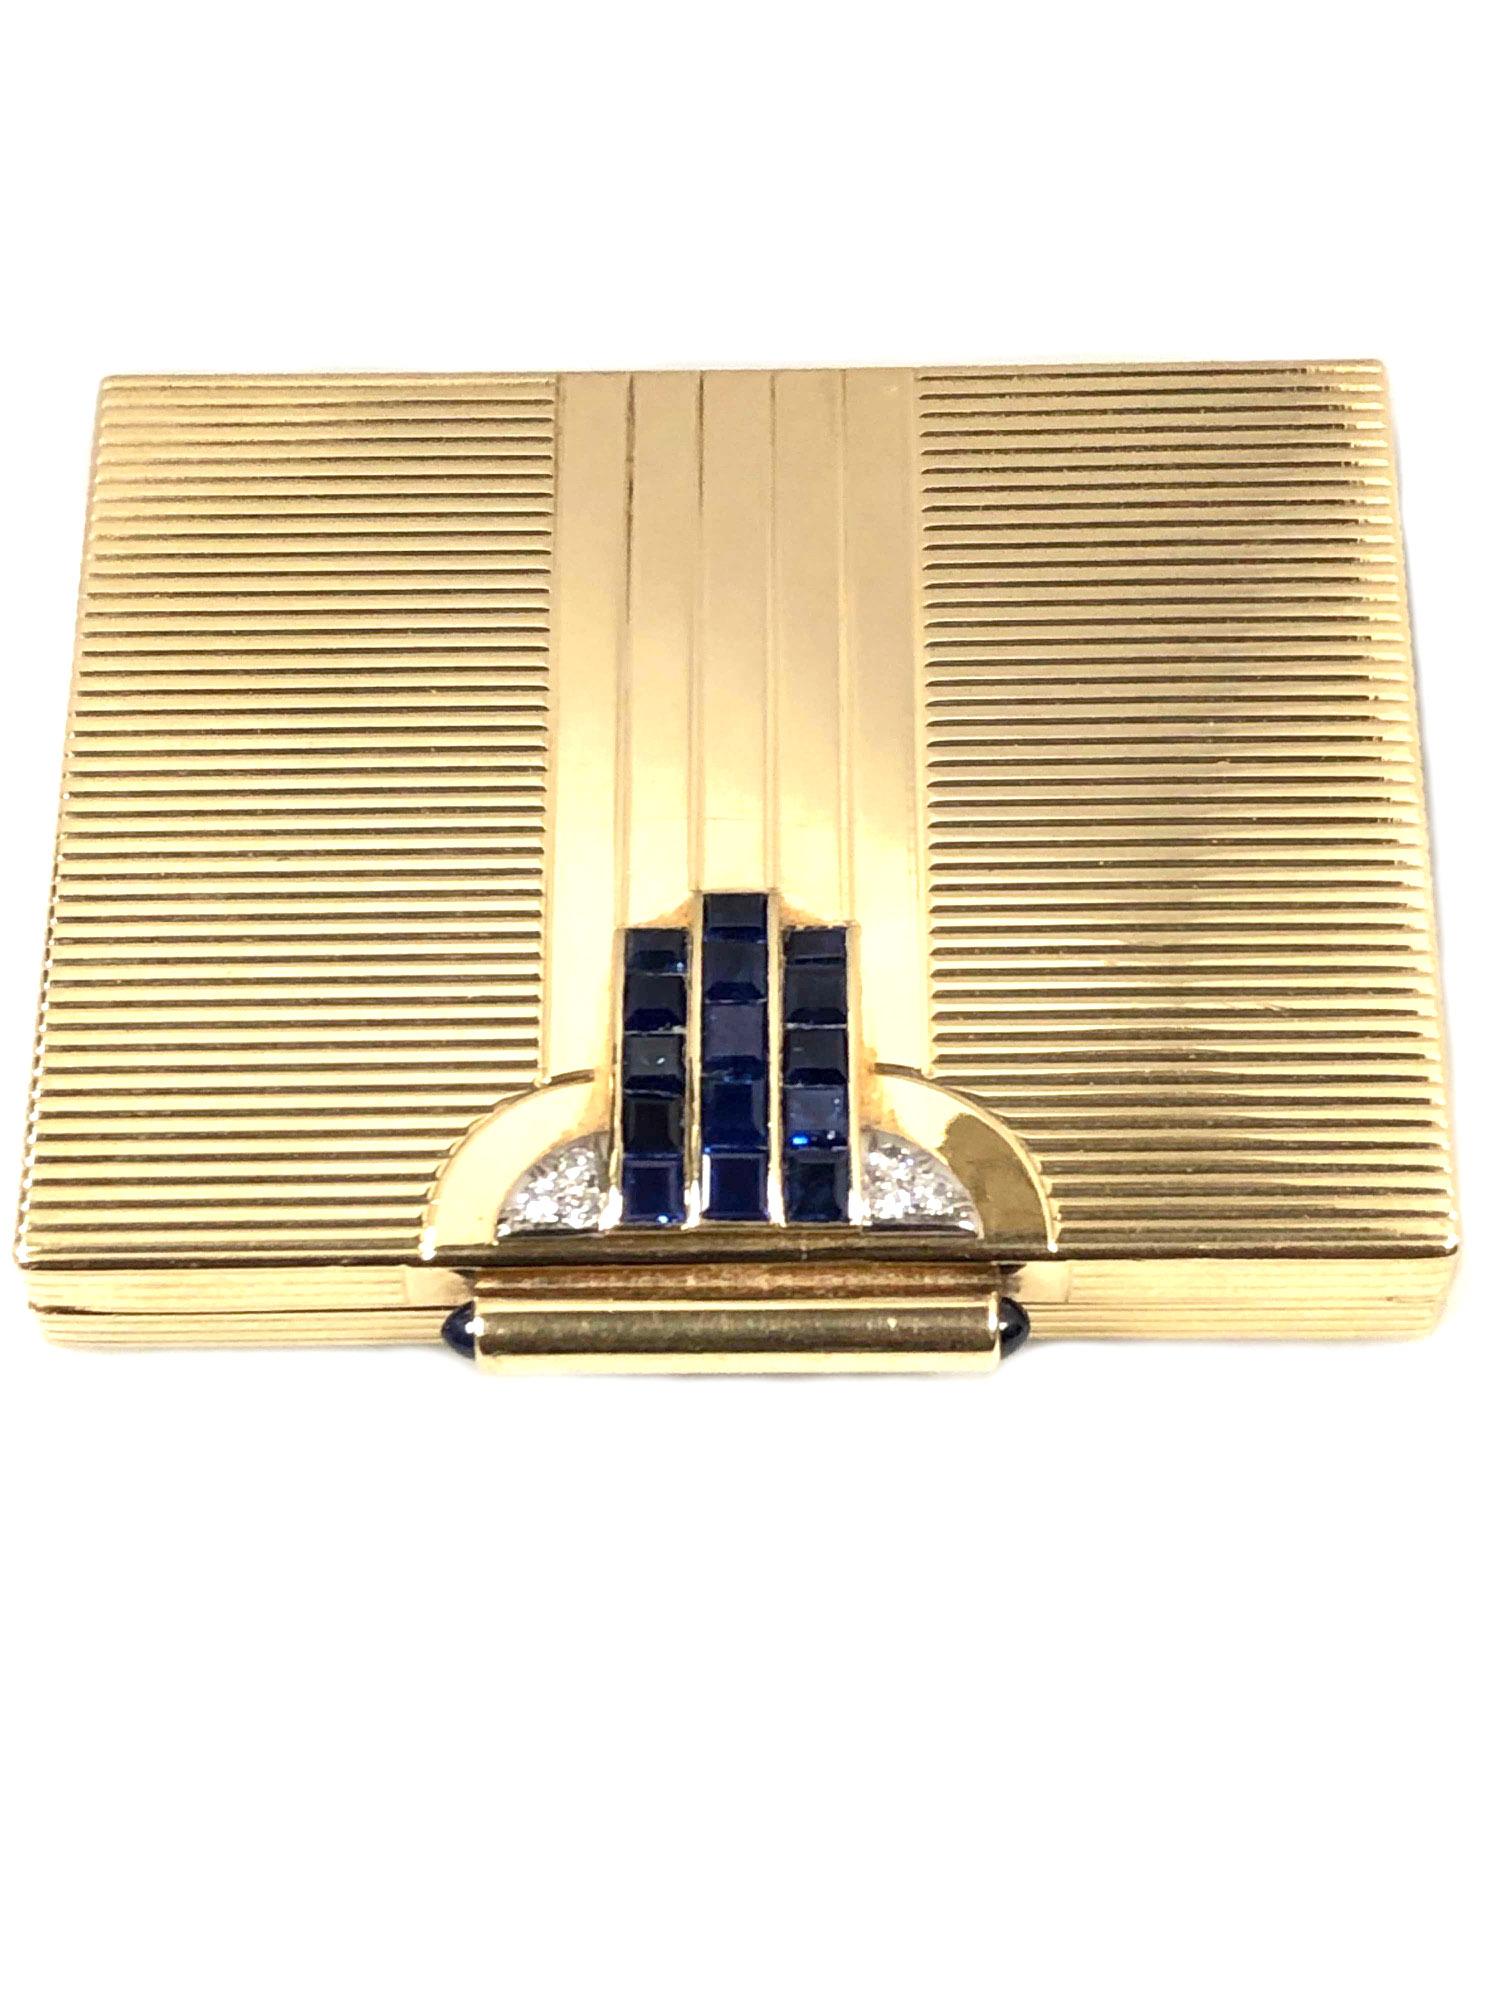 Circa 1940s Cartier Compact, 14K Yellow Gold and Having A Strong Art Deco design, measuring 2 3/4 X 2 1/4 X 3/8  inch. Vertical and Horizontal lines and set with Very Fine Color Square, Step Cut Natural Sapphires, Cabochon Sapphires on the Clasp and